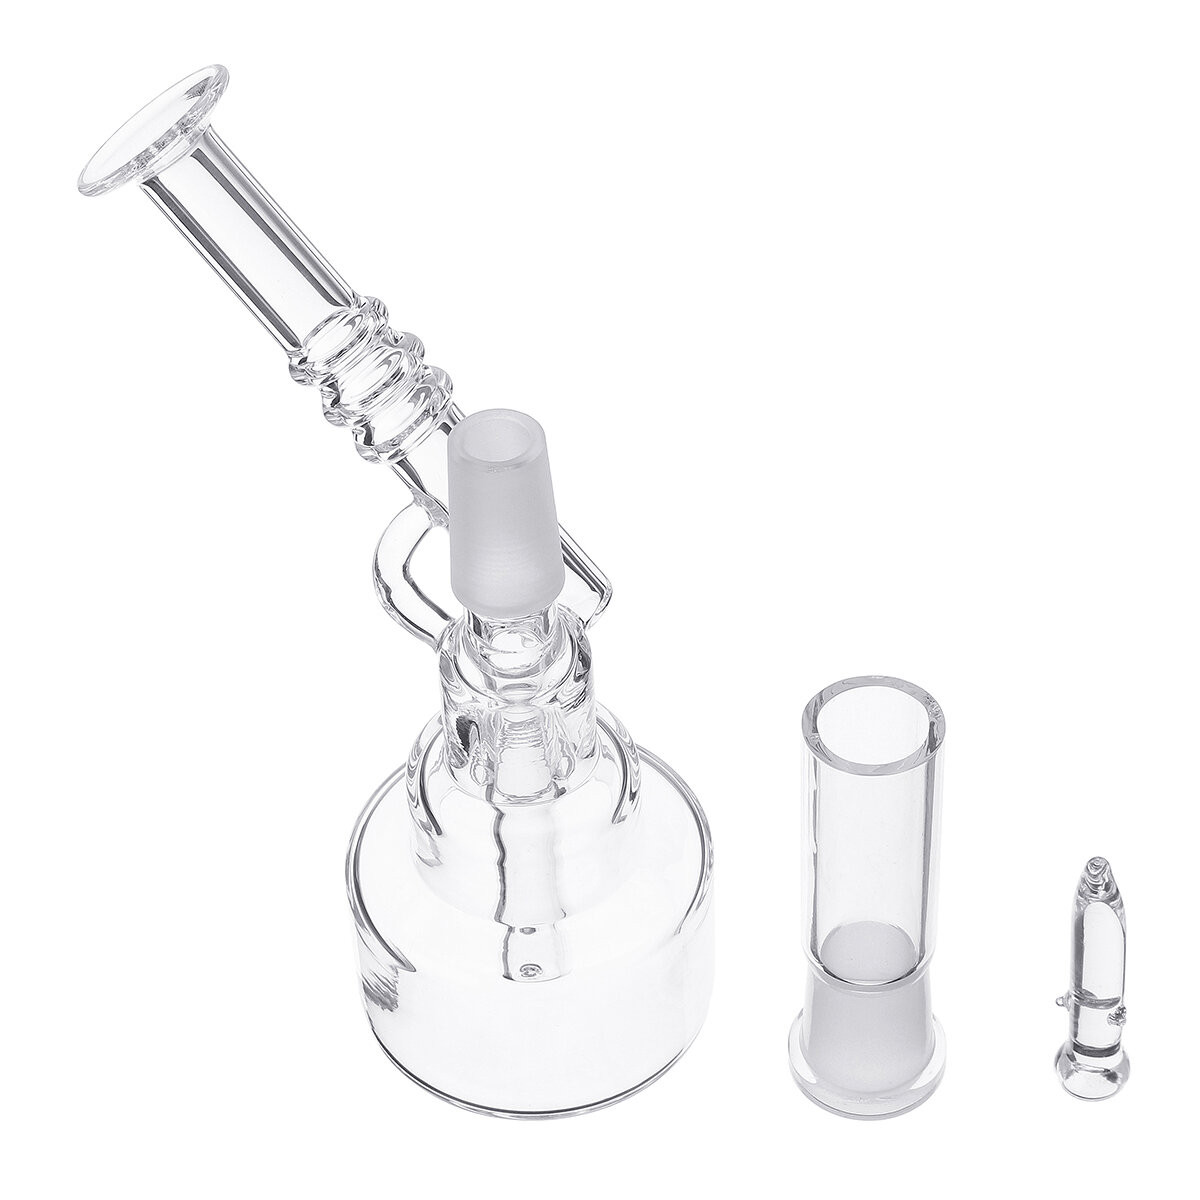 Transparent H ookah Clear Shisha Water Pipe Glass T obacco Dab Rigs For Dry Herb Waxes Oil